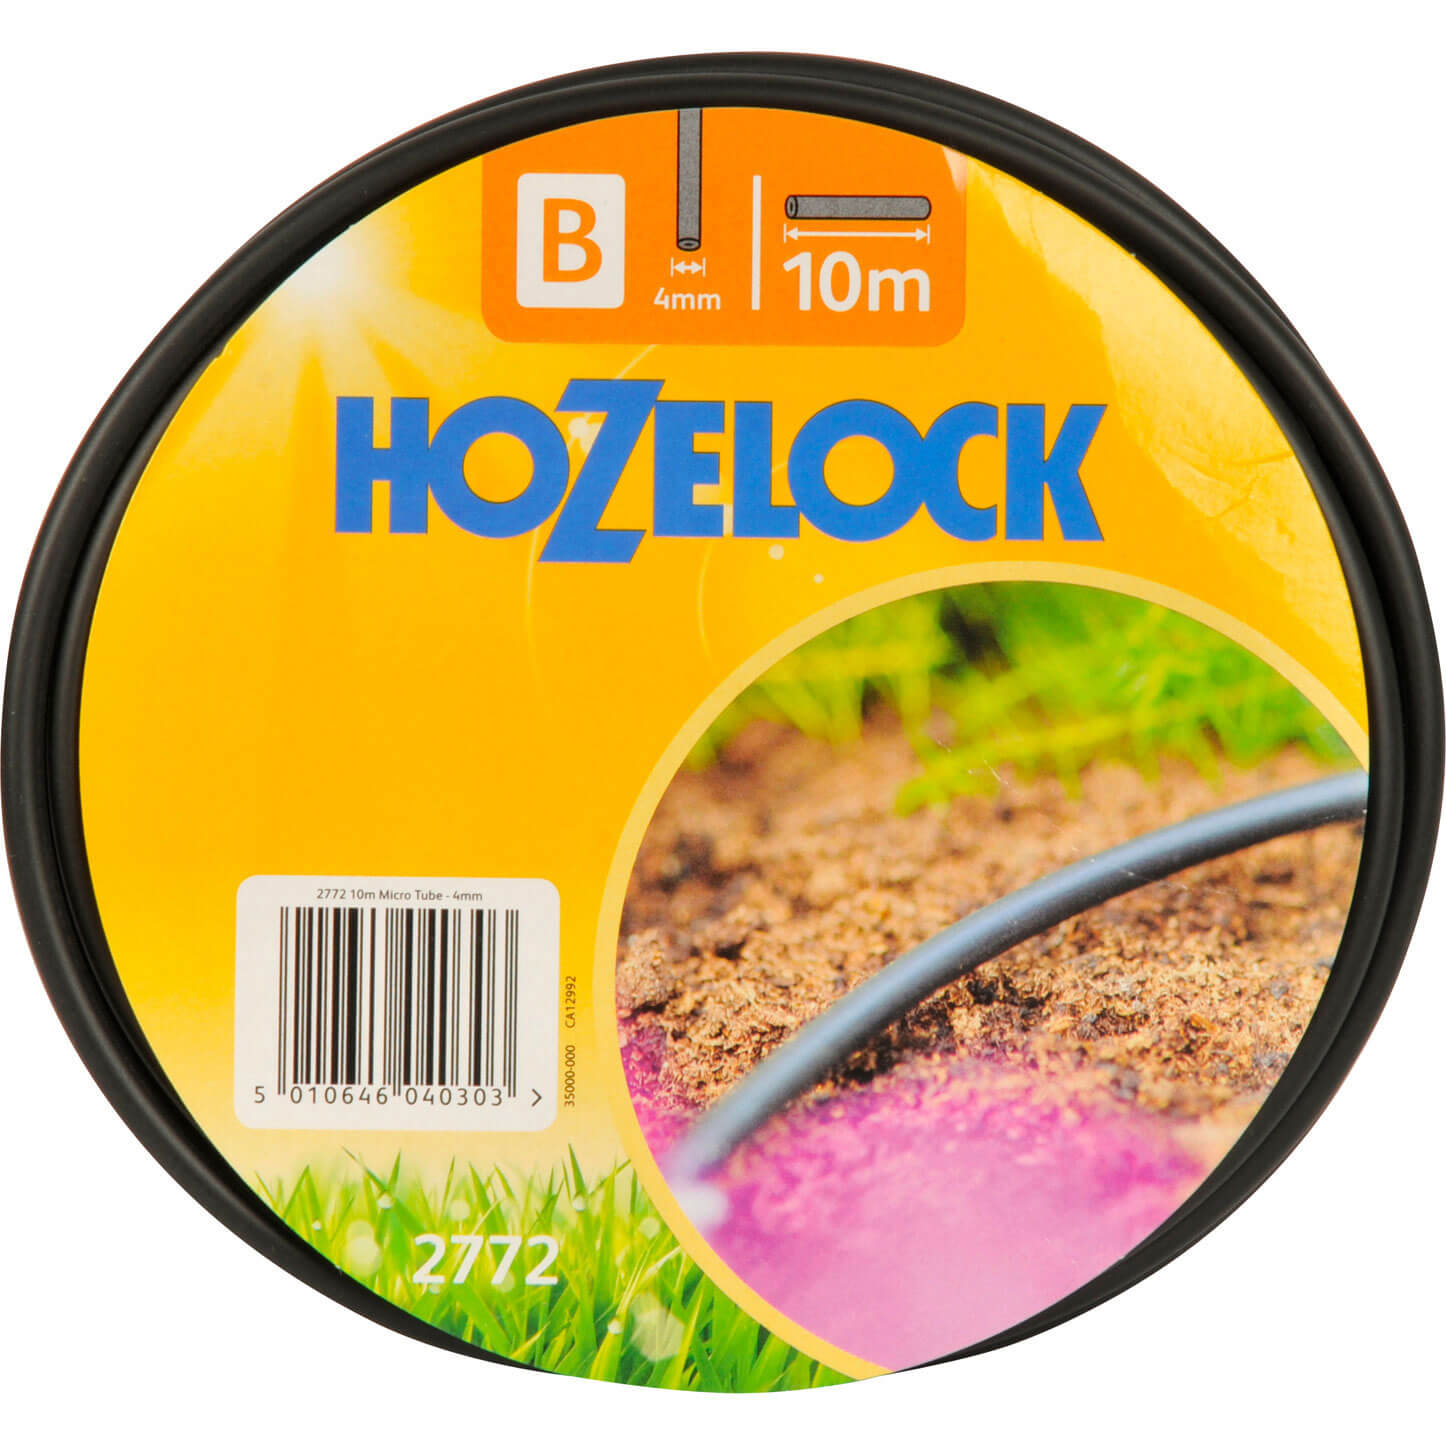 Image of Hozelock MICRO Connecting Irrigation Hose Pipe 5/32" / 4mm 10m